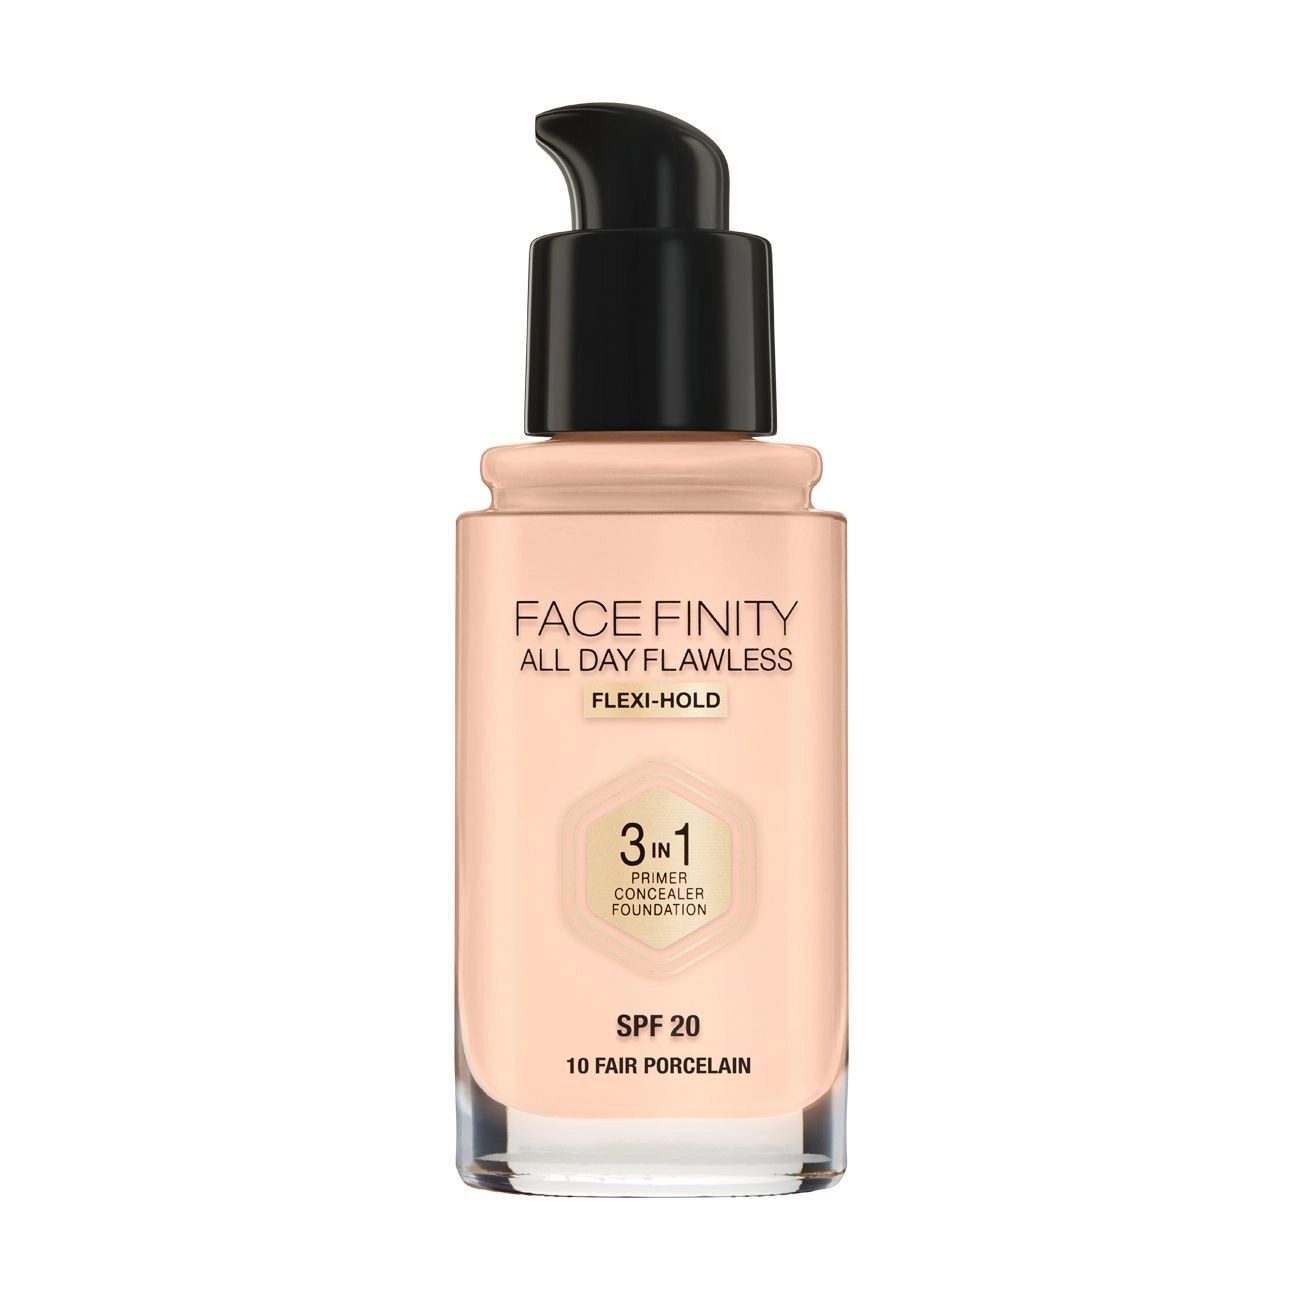 Max Factor Тональная основа Facefinity All Day Flawless 3-in-1 Foundation SPF 20 10 Fair Porcelain 30 мл - фото N2